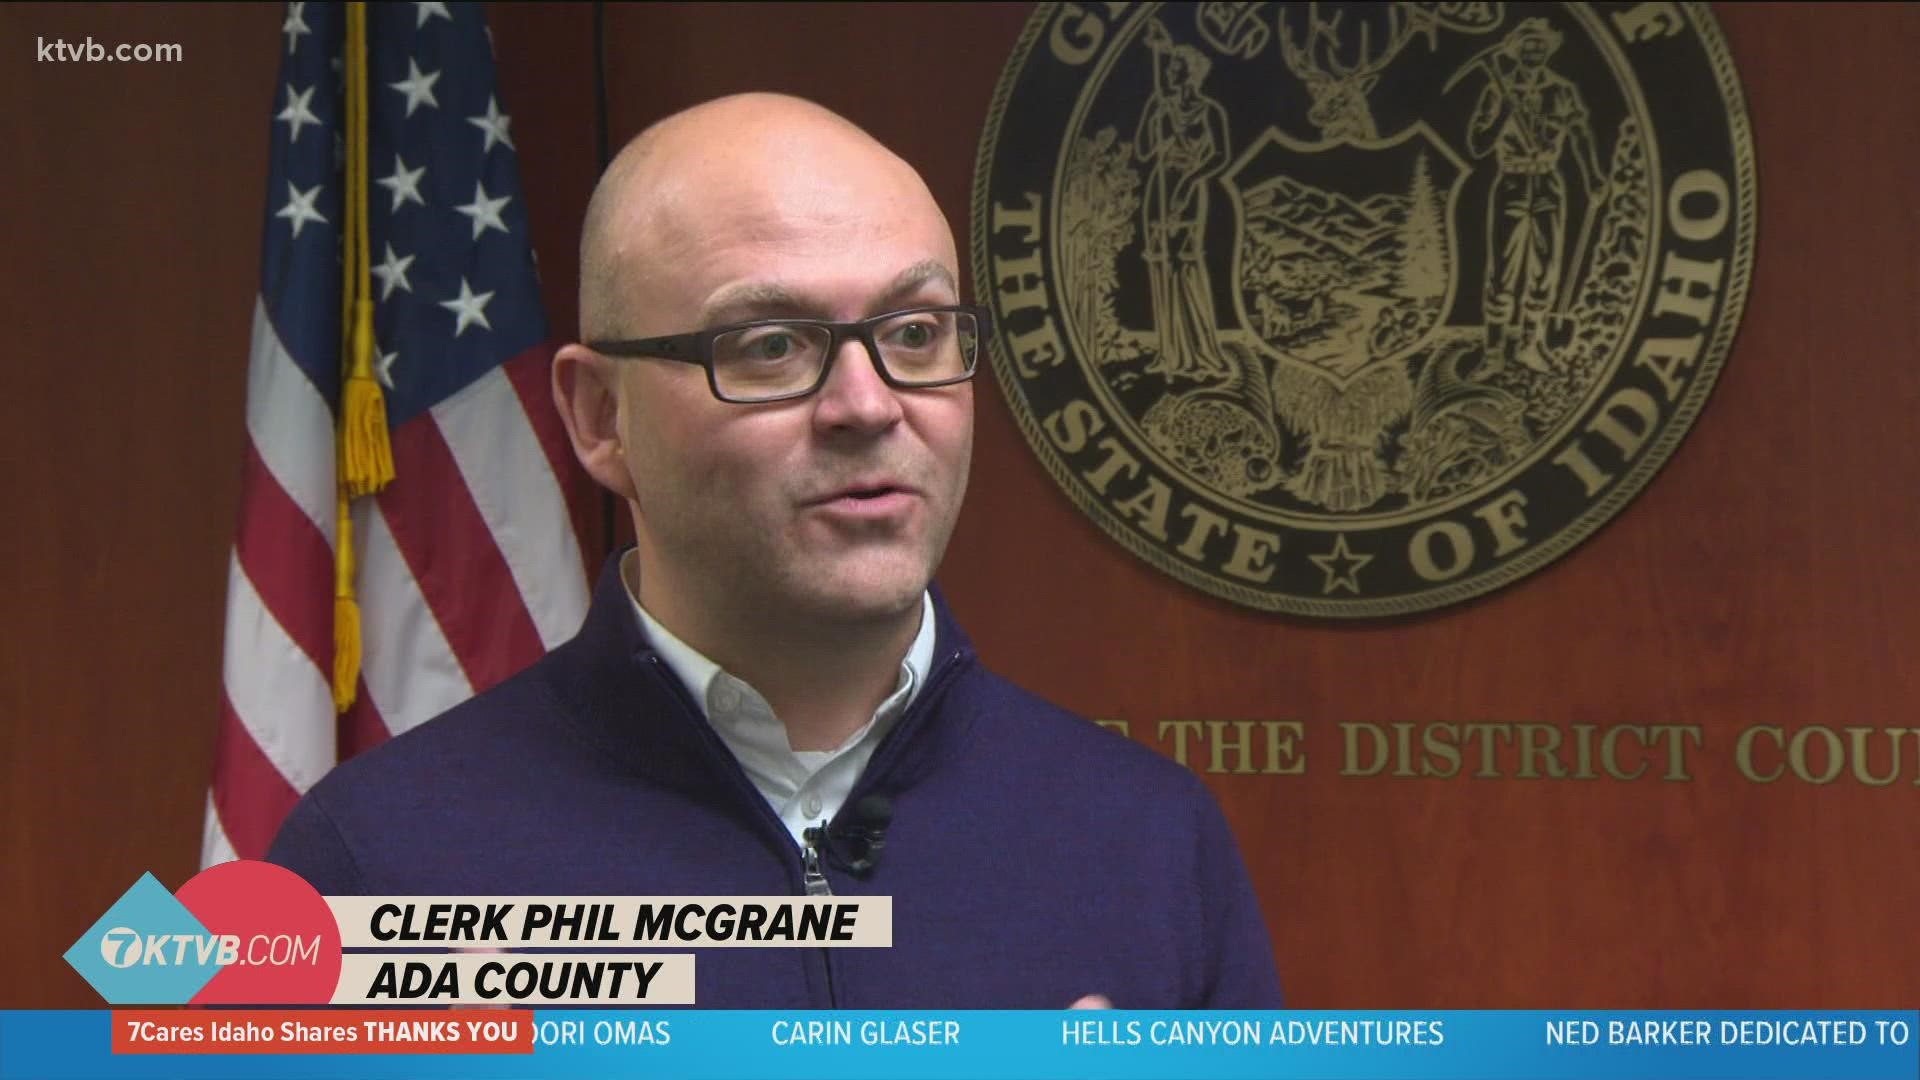 Clerk Phil McGrane says he first reported the ballot mistake to state officials weeks ago, and that the candidates are well aware of the issue and process.